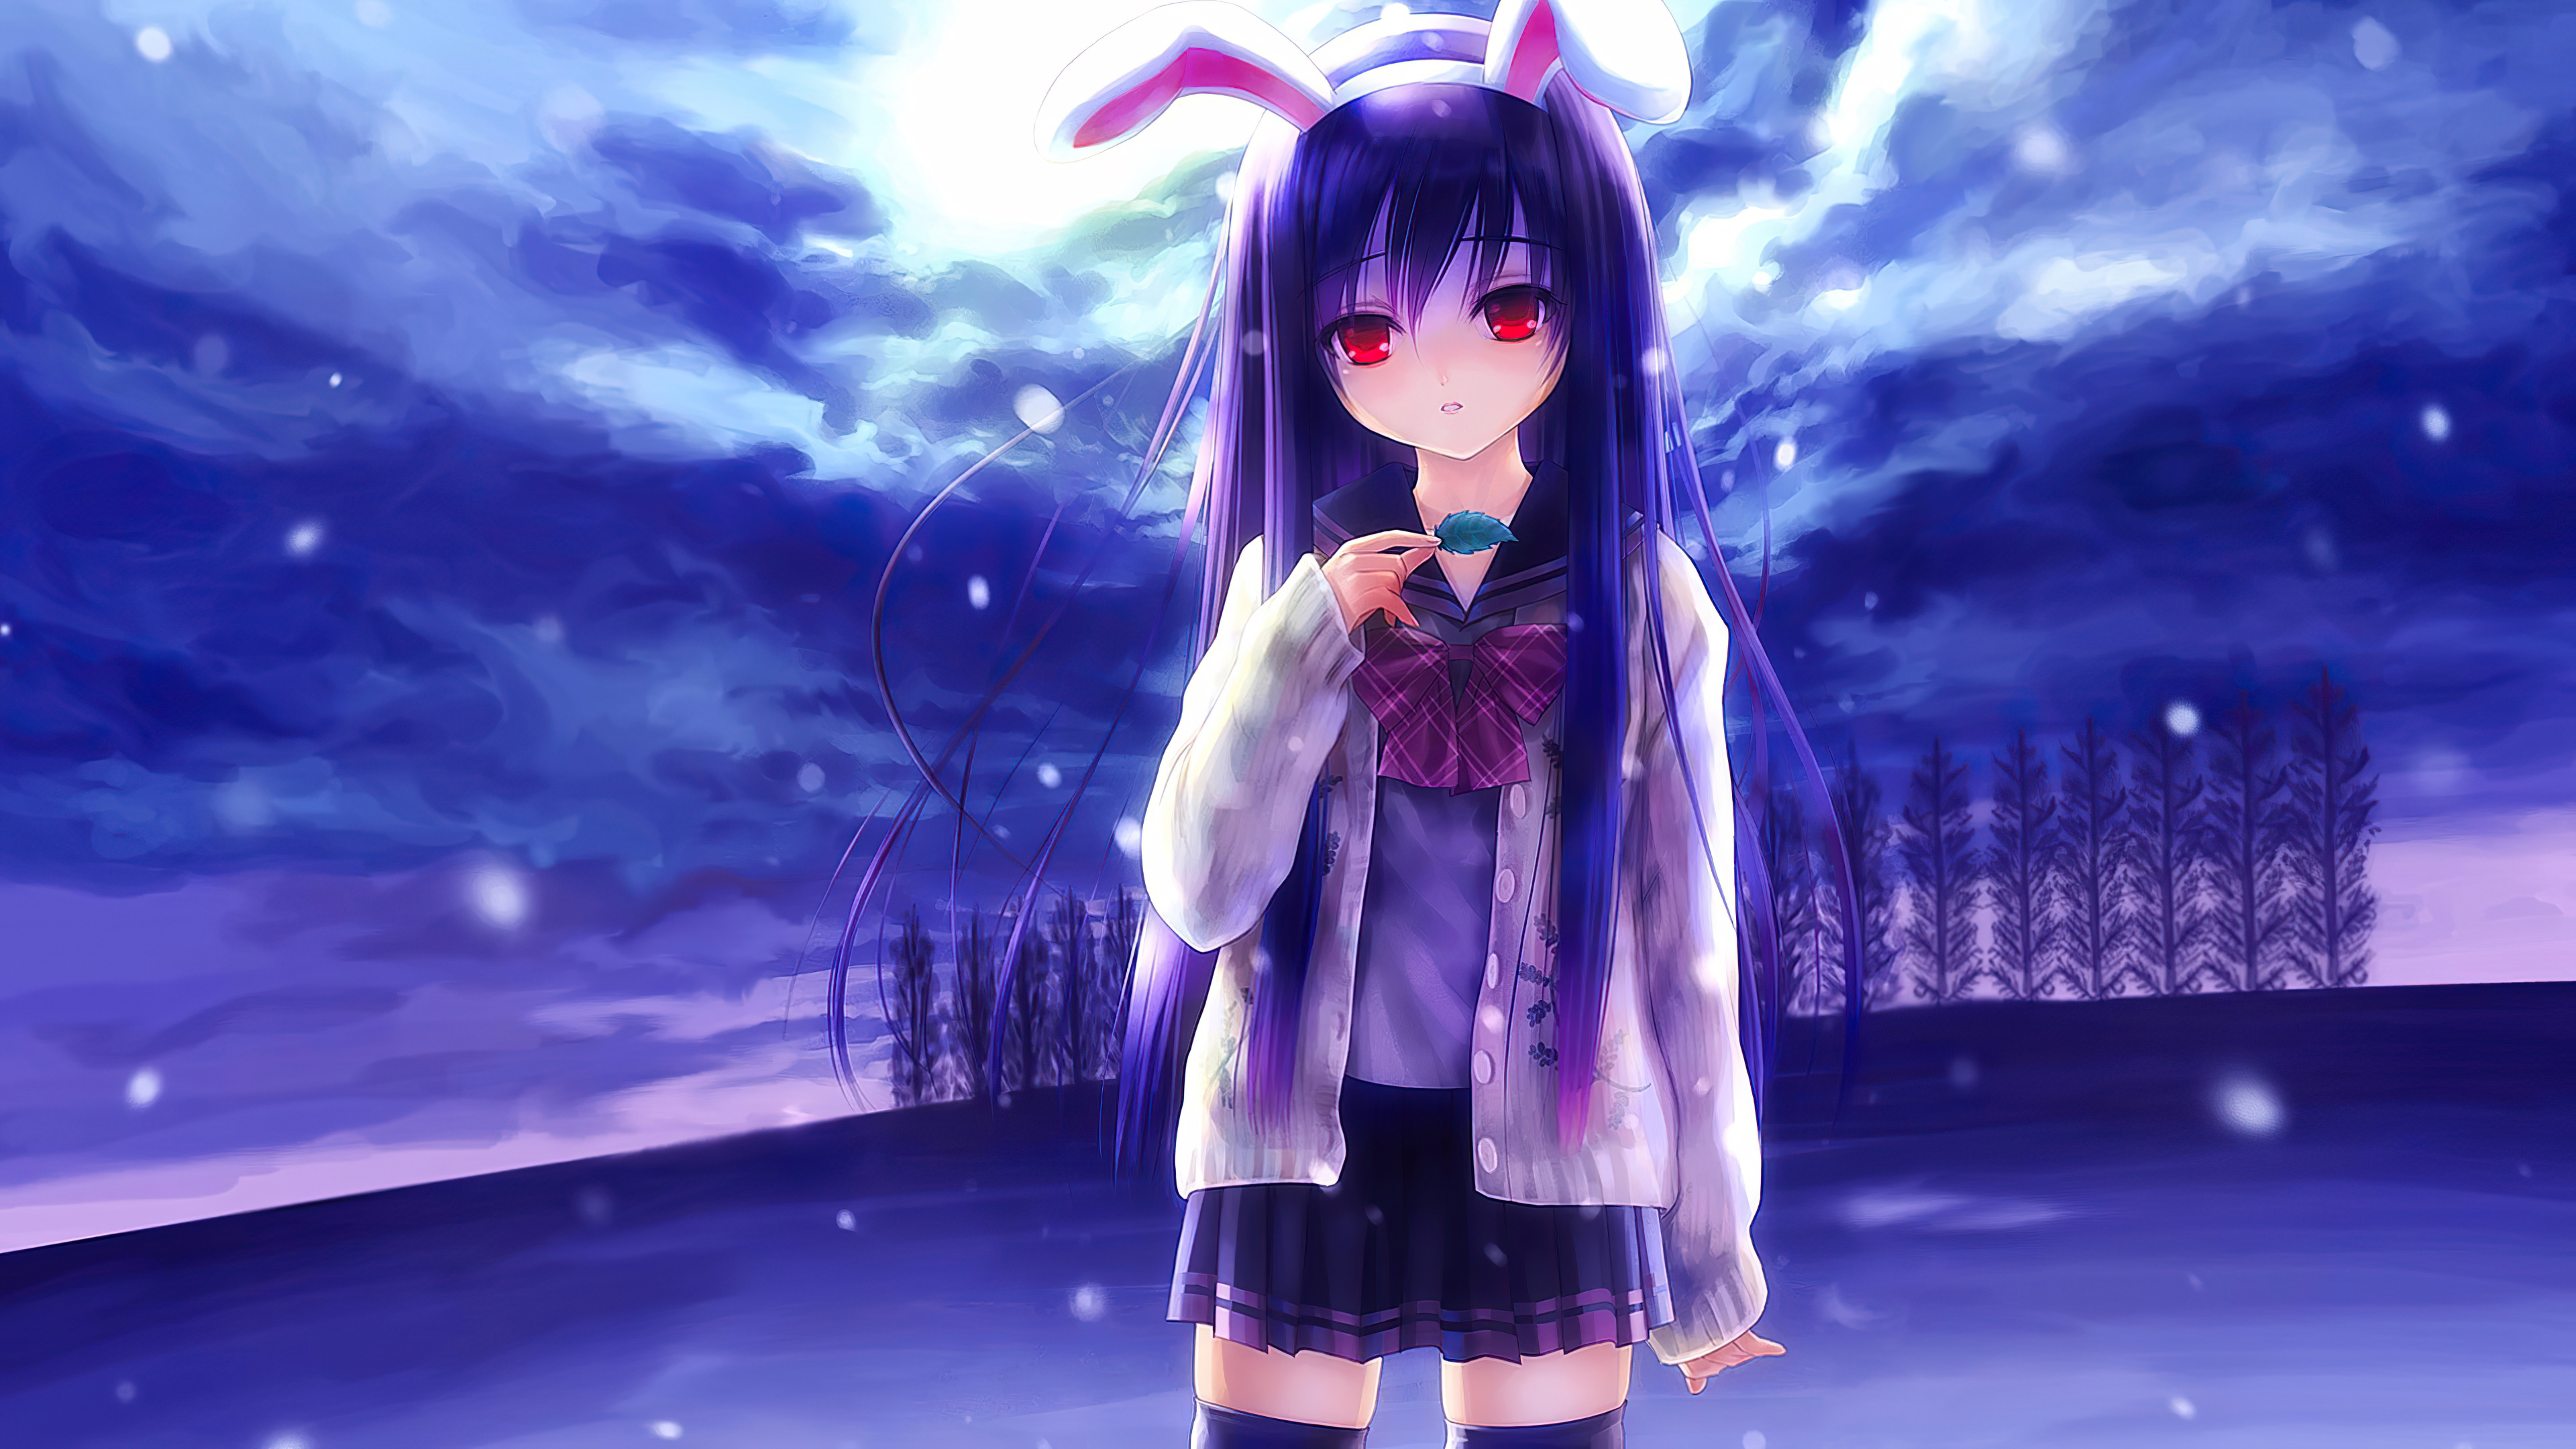 reisen udongein inaba 1596917254 - Reisen Udongein Inaba - Reisen Udongein Inaba girl wallpapers, Reisen Udongein Inaba 4k wallpapers